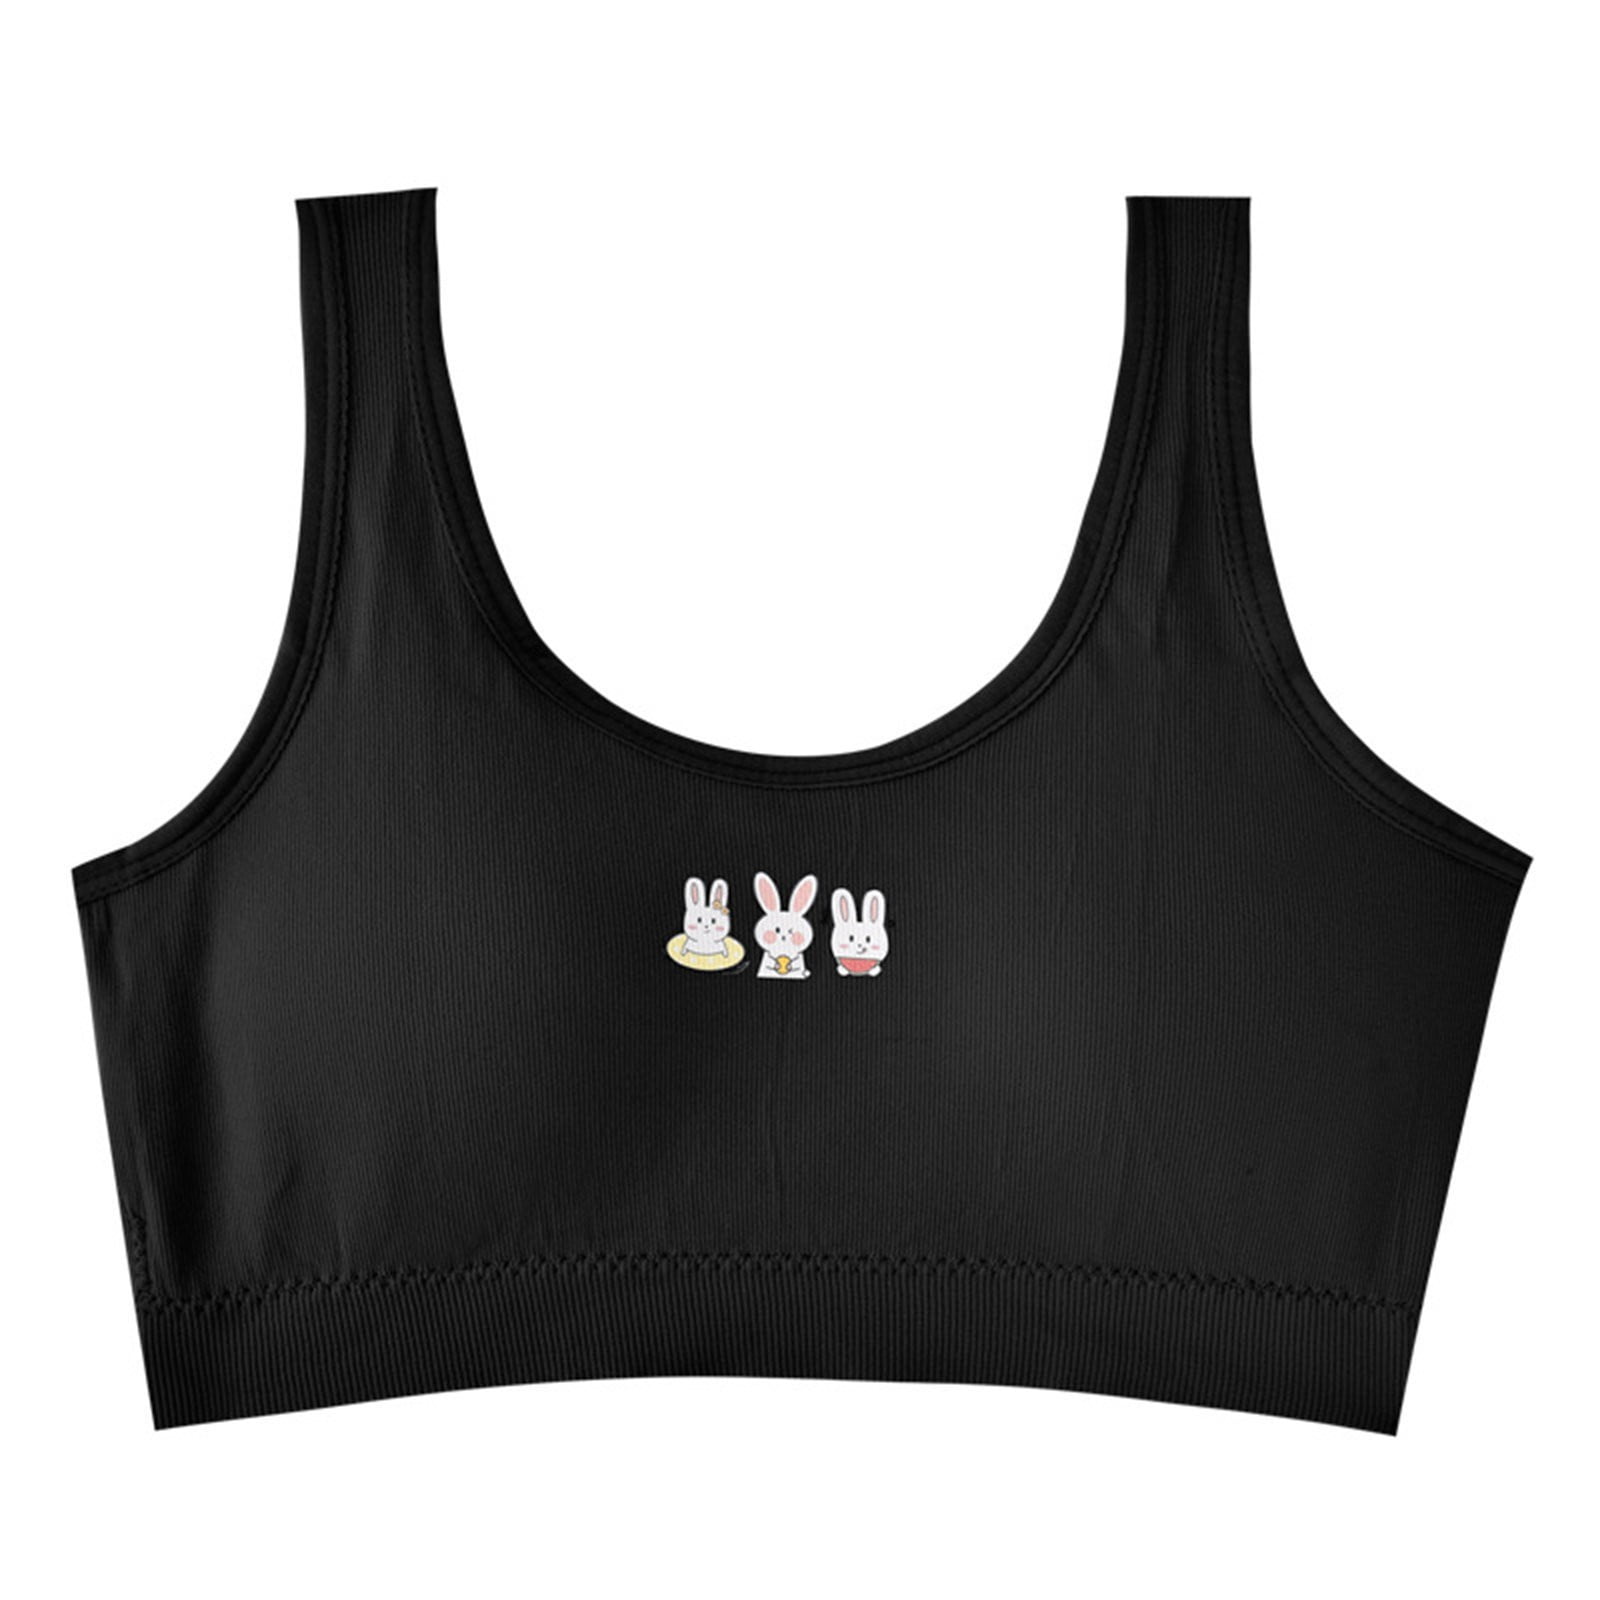 Love Sports Teen Girl's Racer back Straps Vest – Young Hearts Sdn